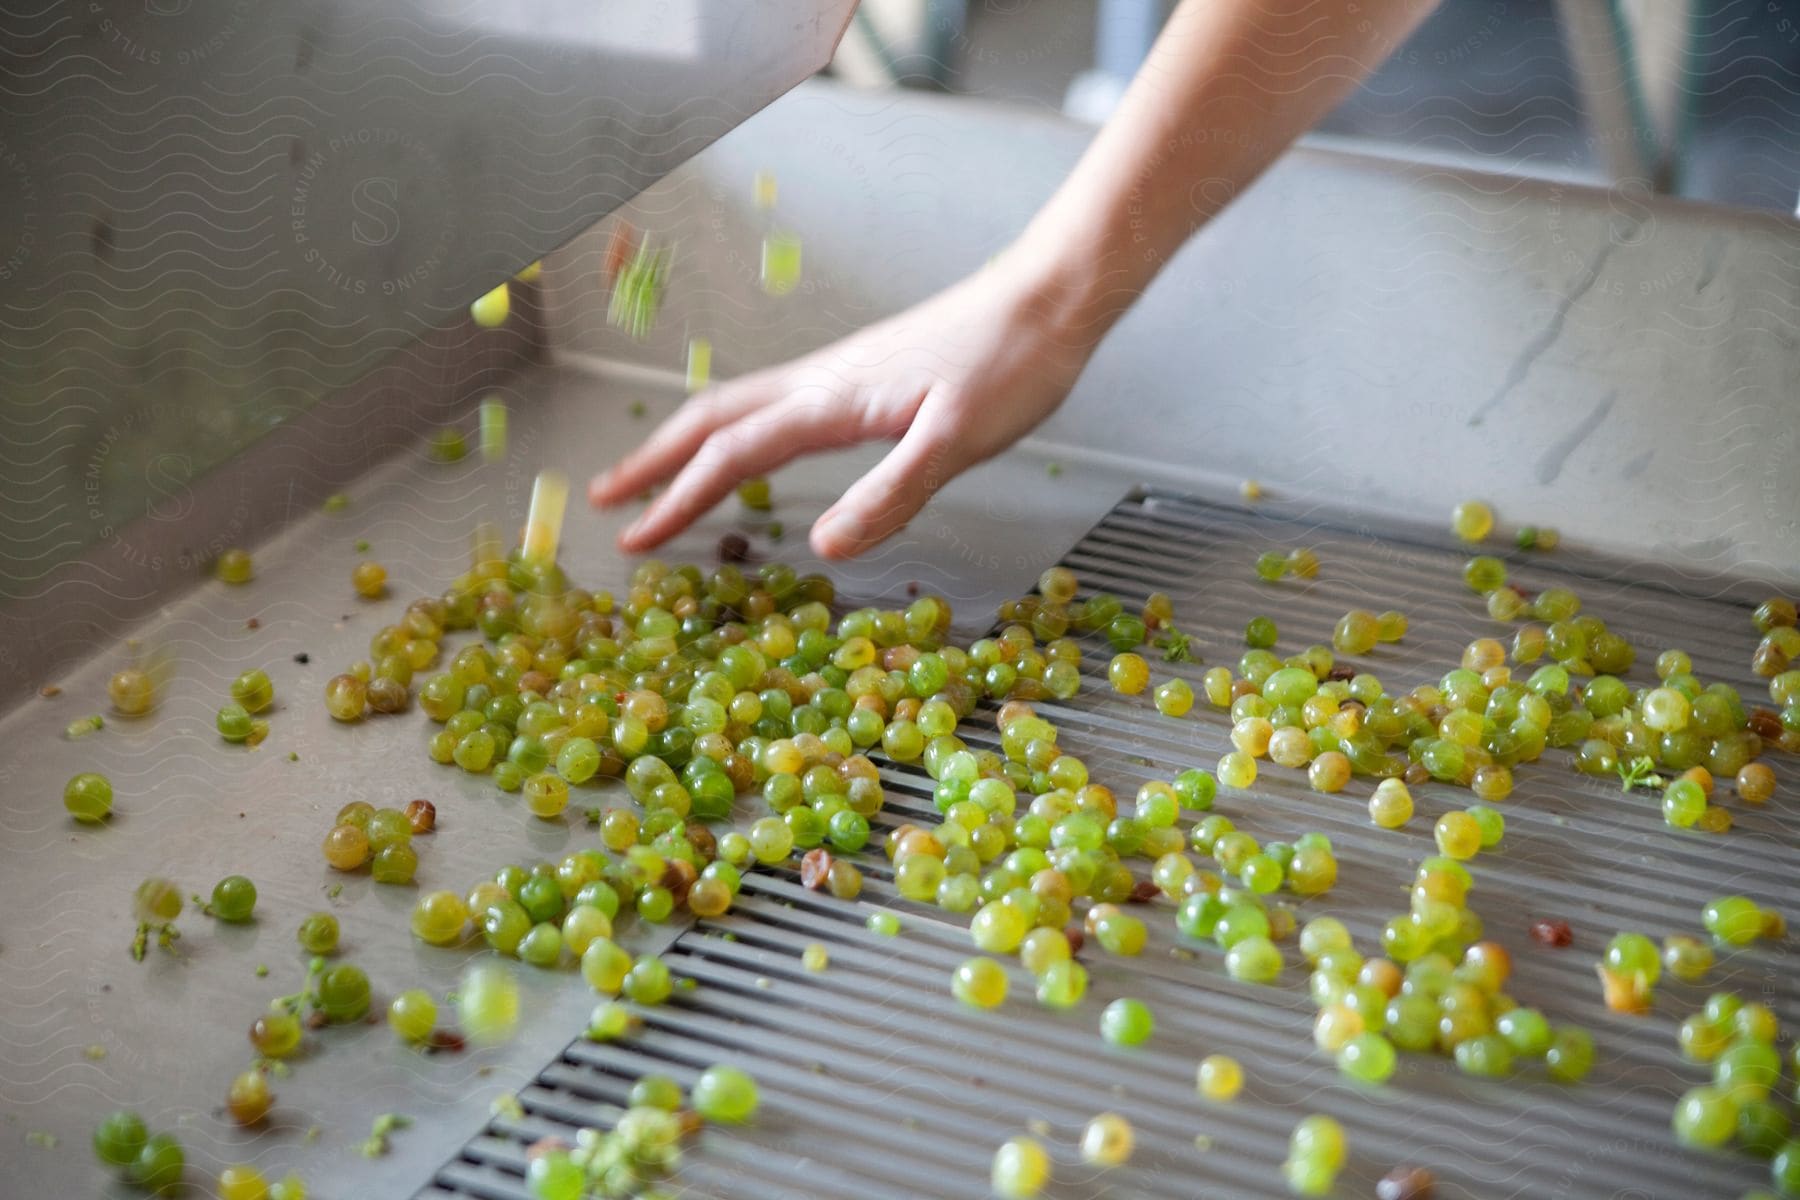 A person is working at a machine where grapes are going through for sorting